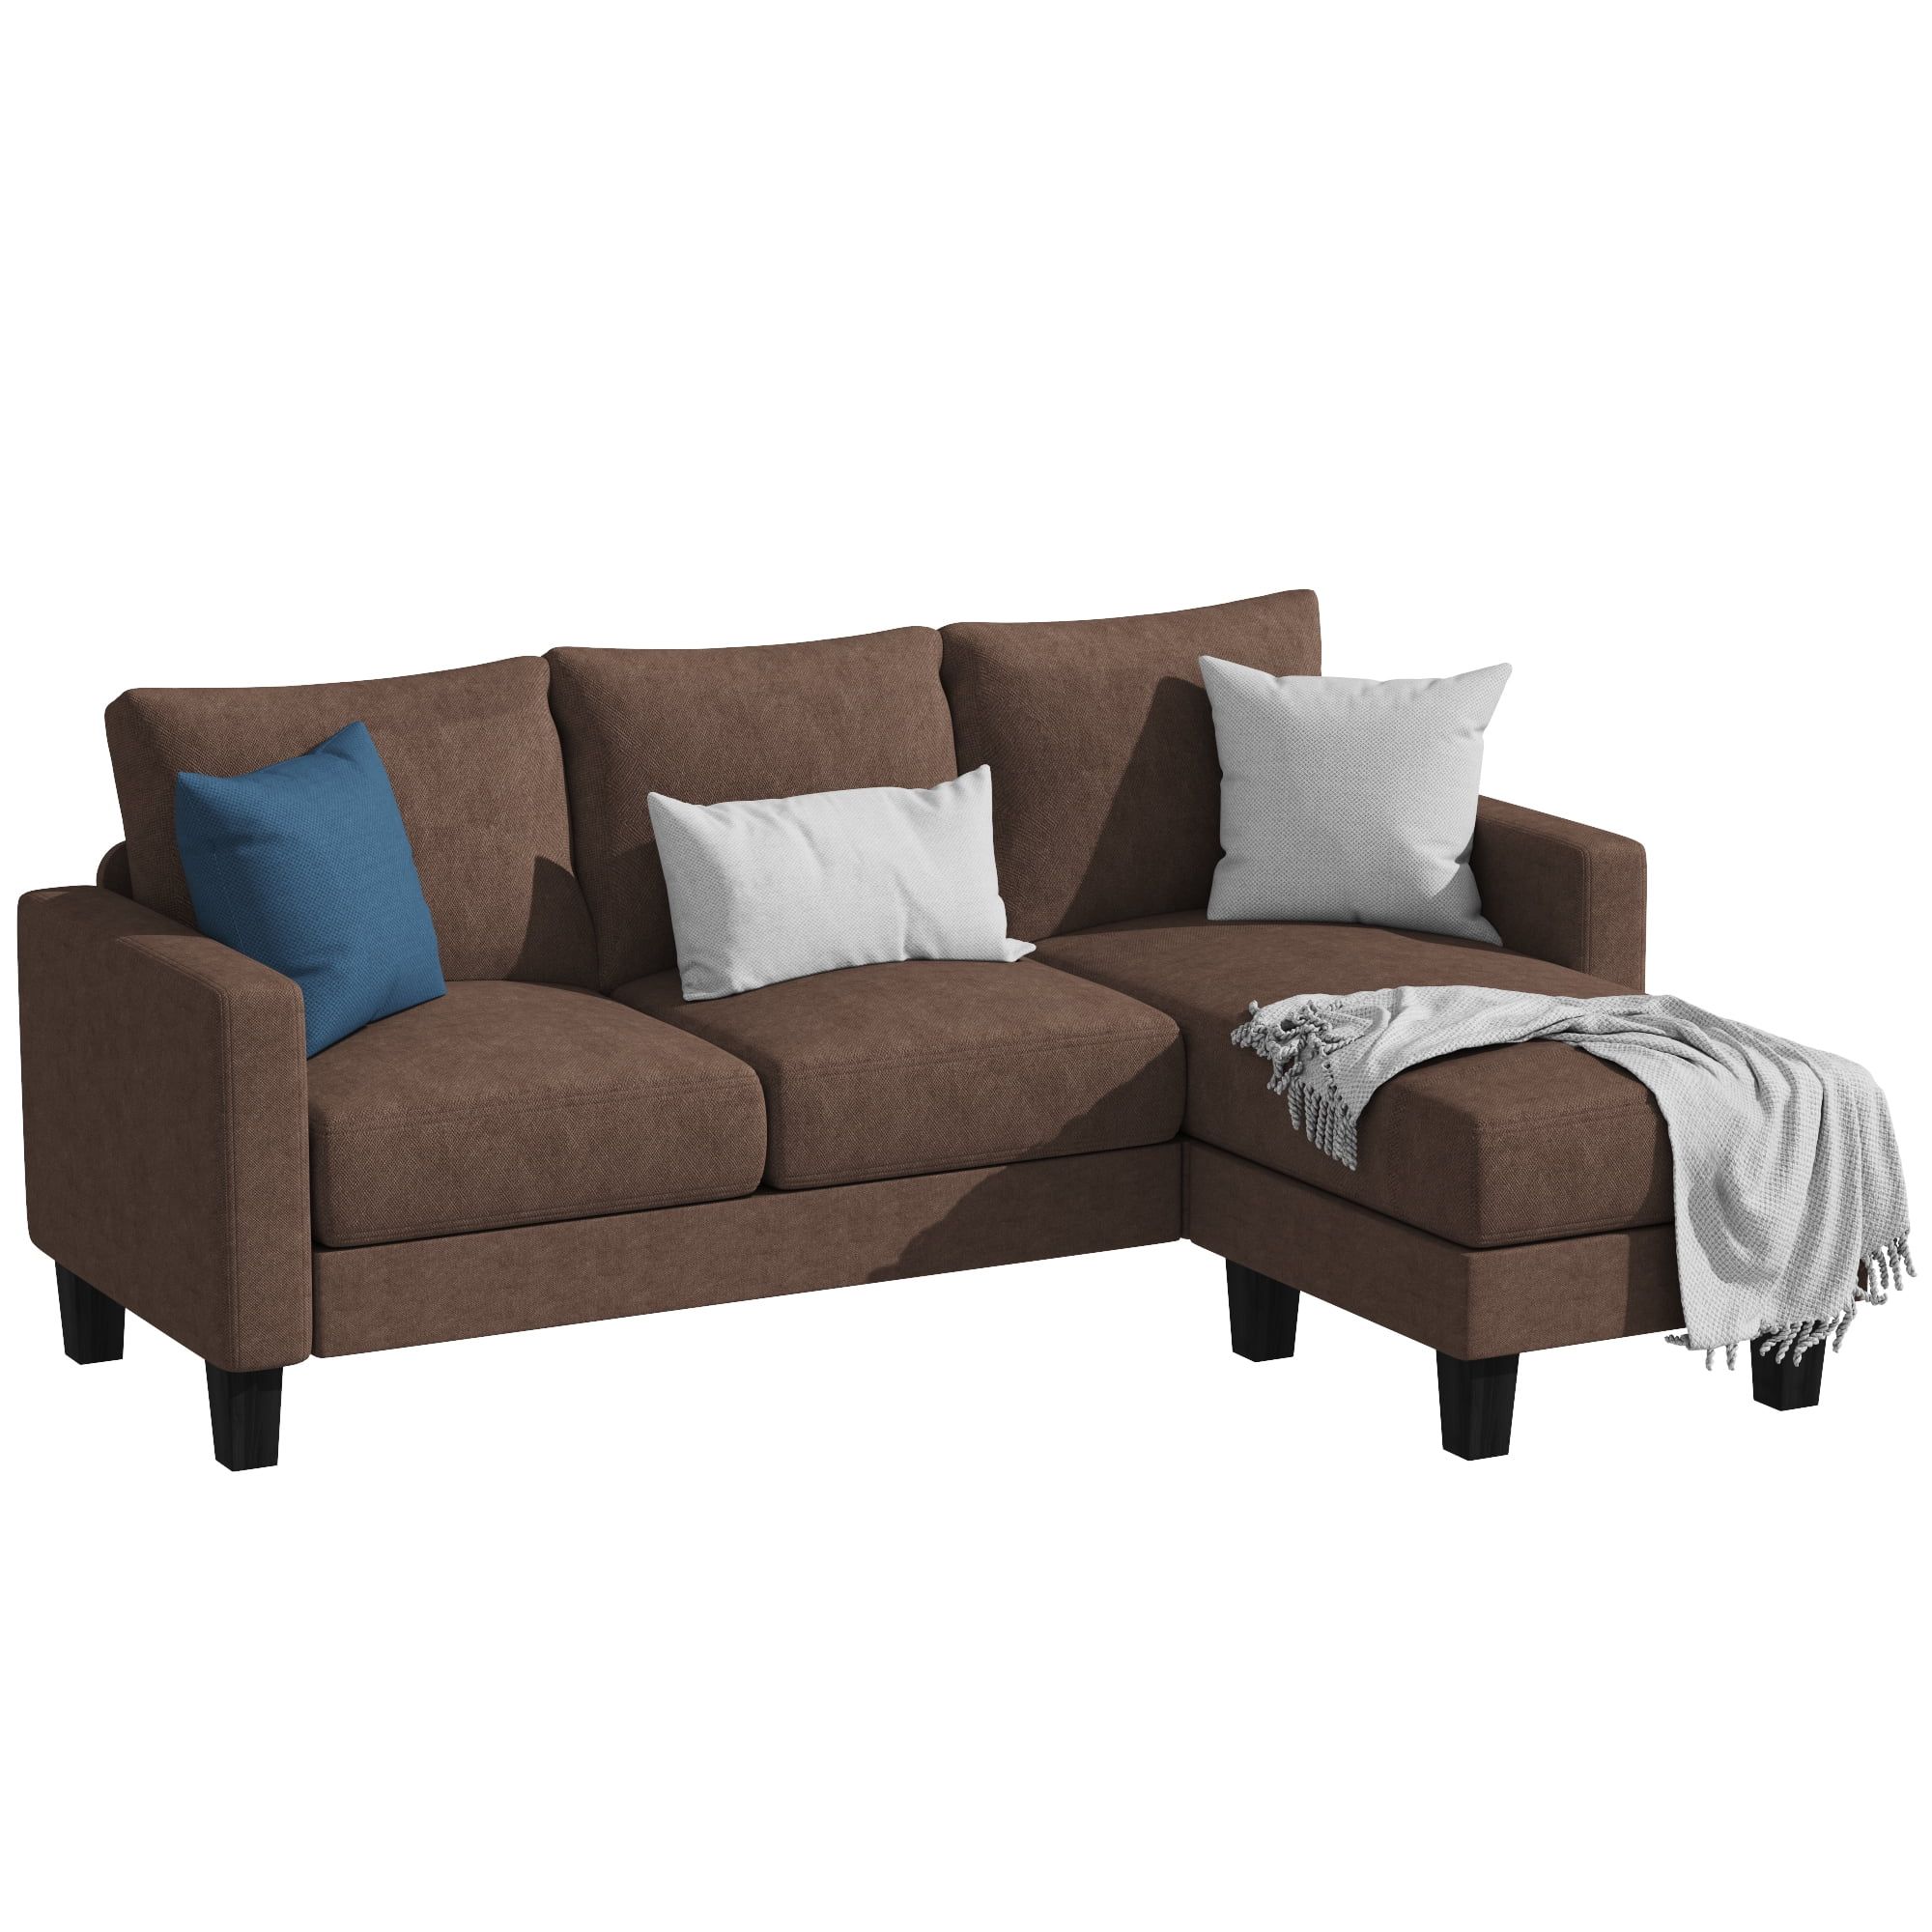 Buy Homall Convertible Sectional Sofa Couch, Modern Linen Fabric L Pertaining To 3 Seat Convertible Sectional Sofas (View 9 of 20)